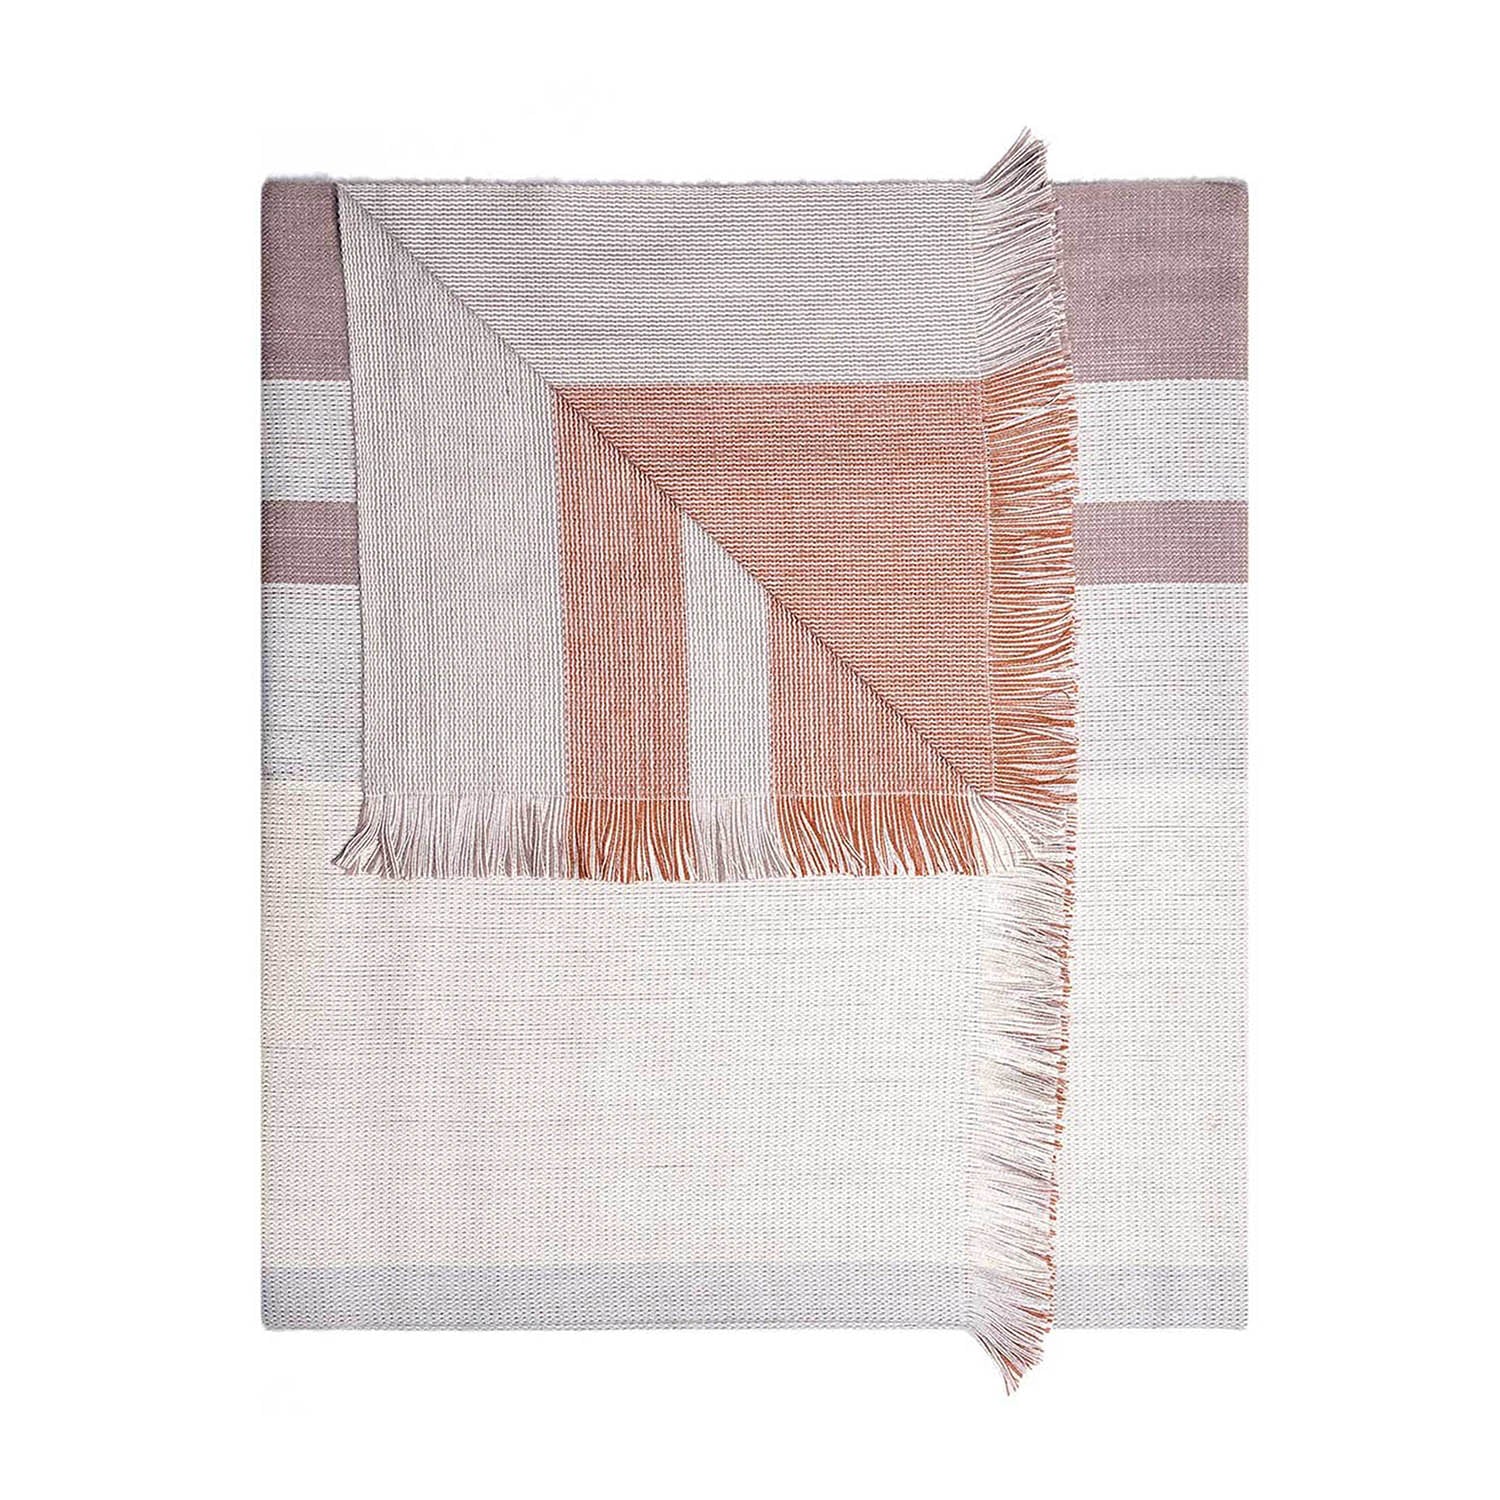 faded rust alpaca throw from Shupaca with striped detailing